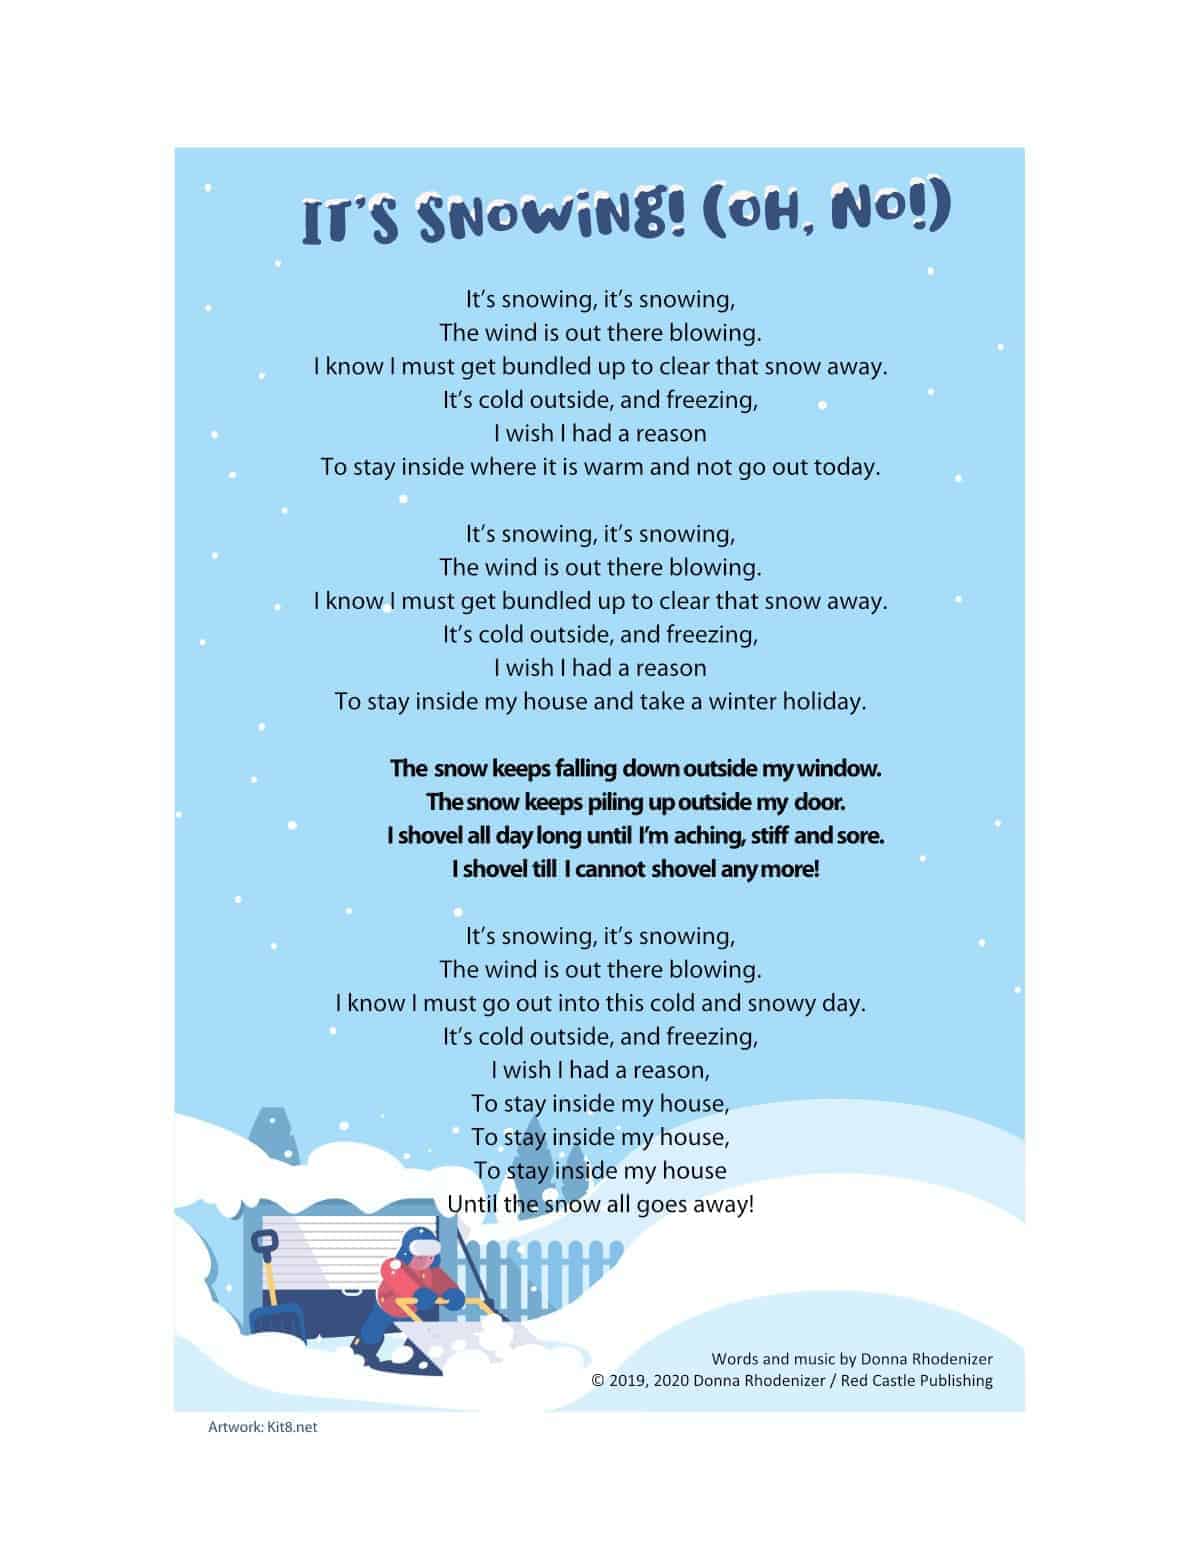 It's Snowing! (Oh, YES!/Oh, No!) by Donna Rhodenizer